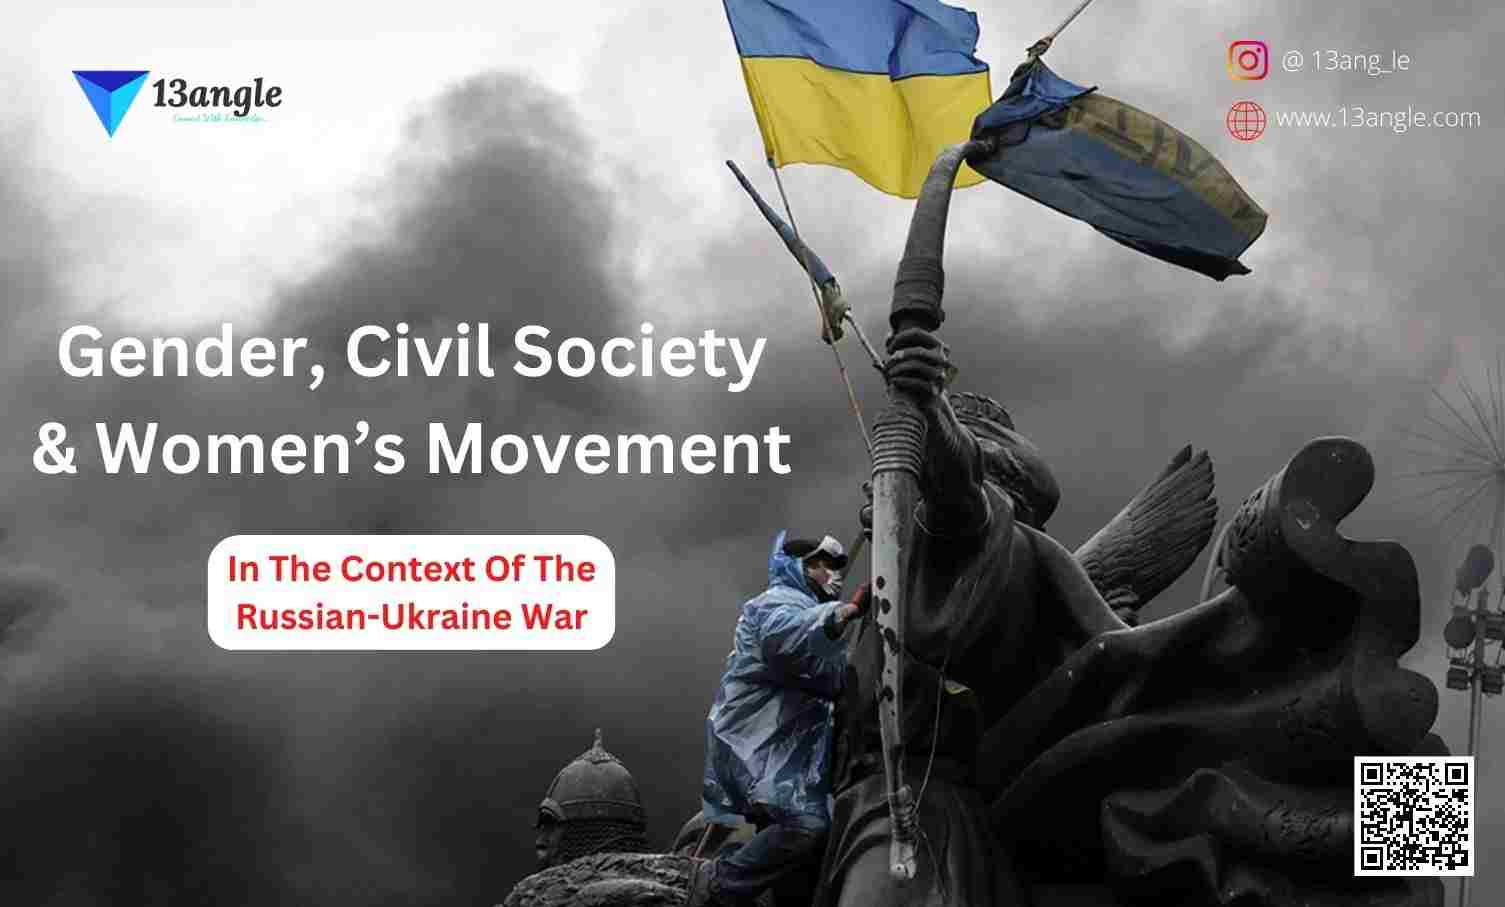 Gender, Civil Society & Women’s Movement In The Context Of The Russian-Ukraine War- 13angle.com